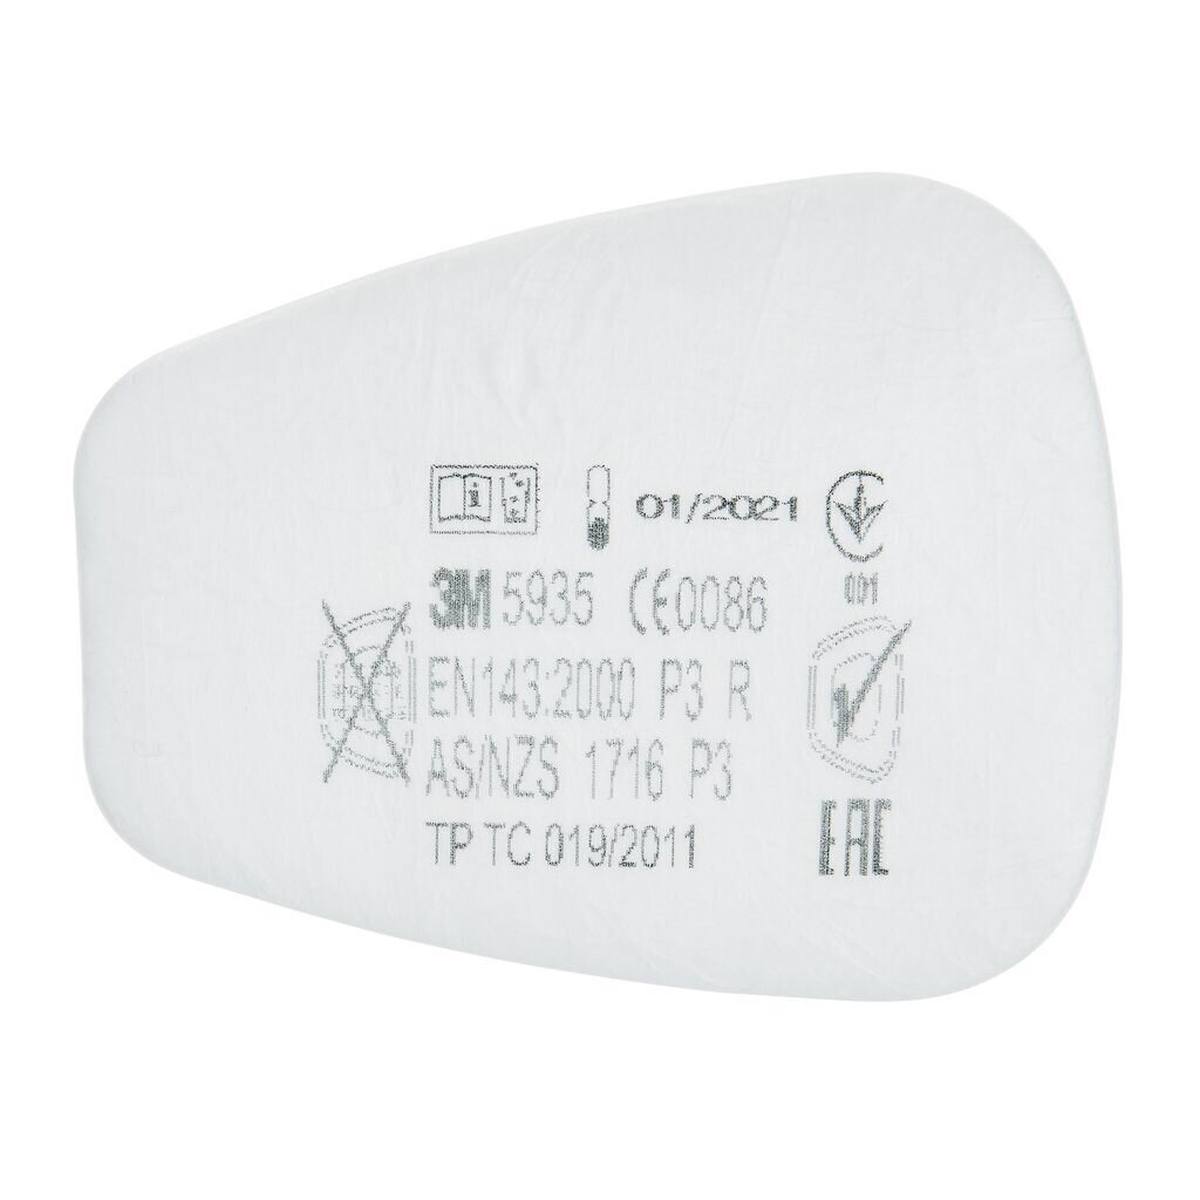 3M 5935 P3R Particle insert filter against solid and liquid particles